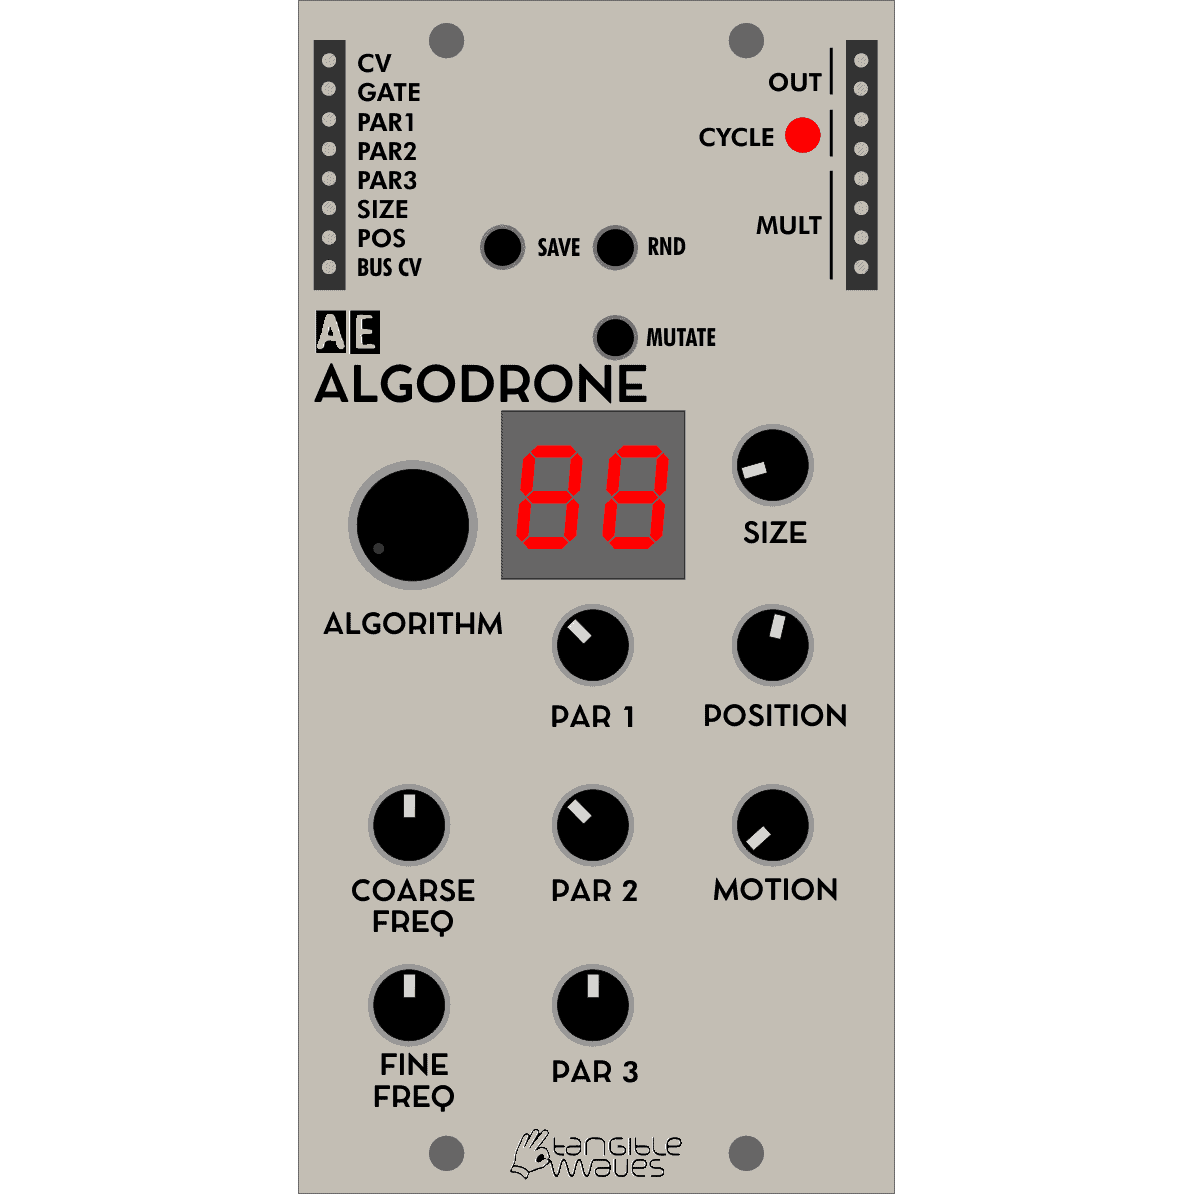 ALGODRONE for AE Modular large